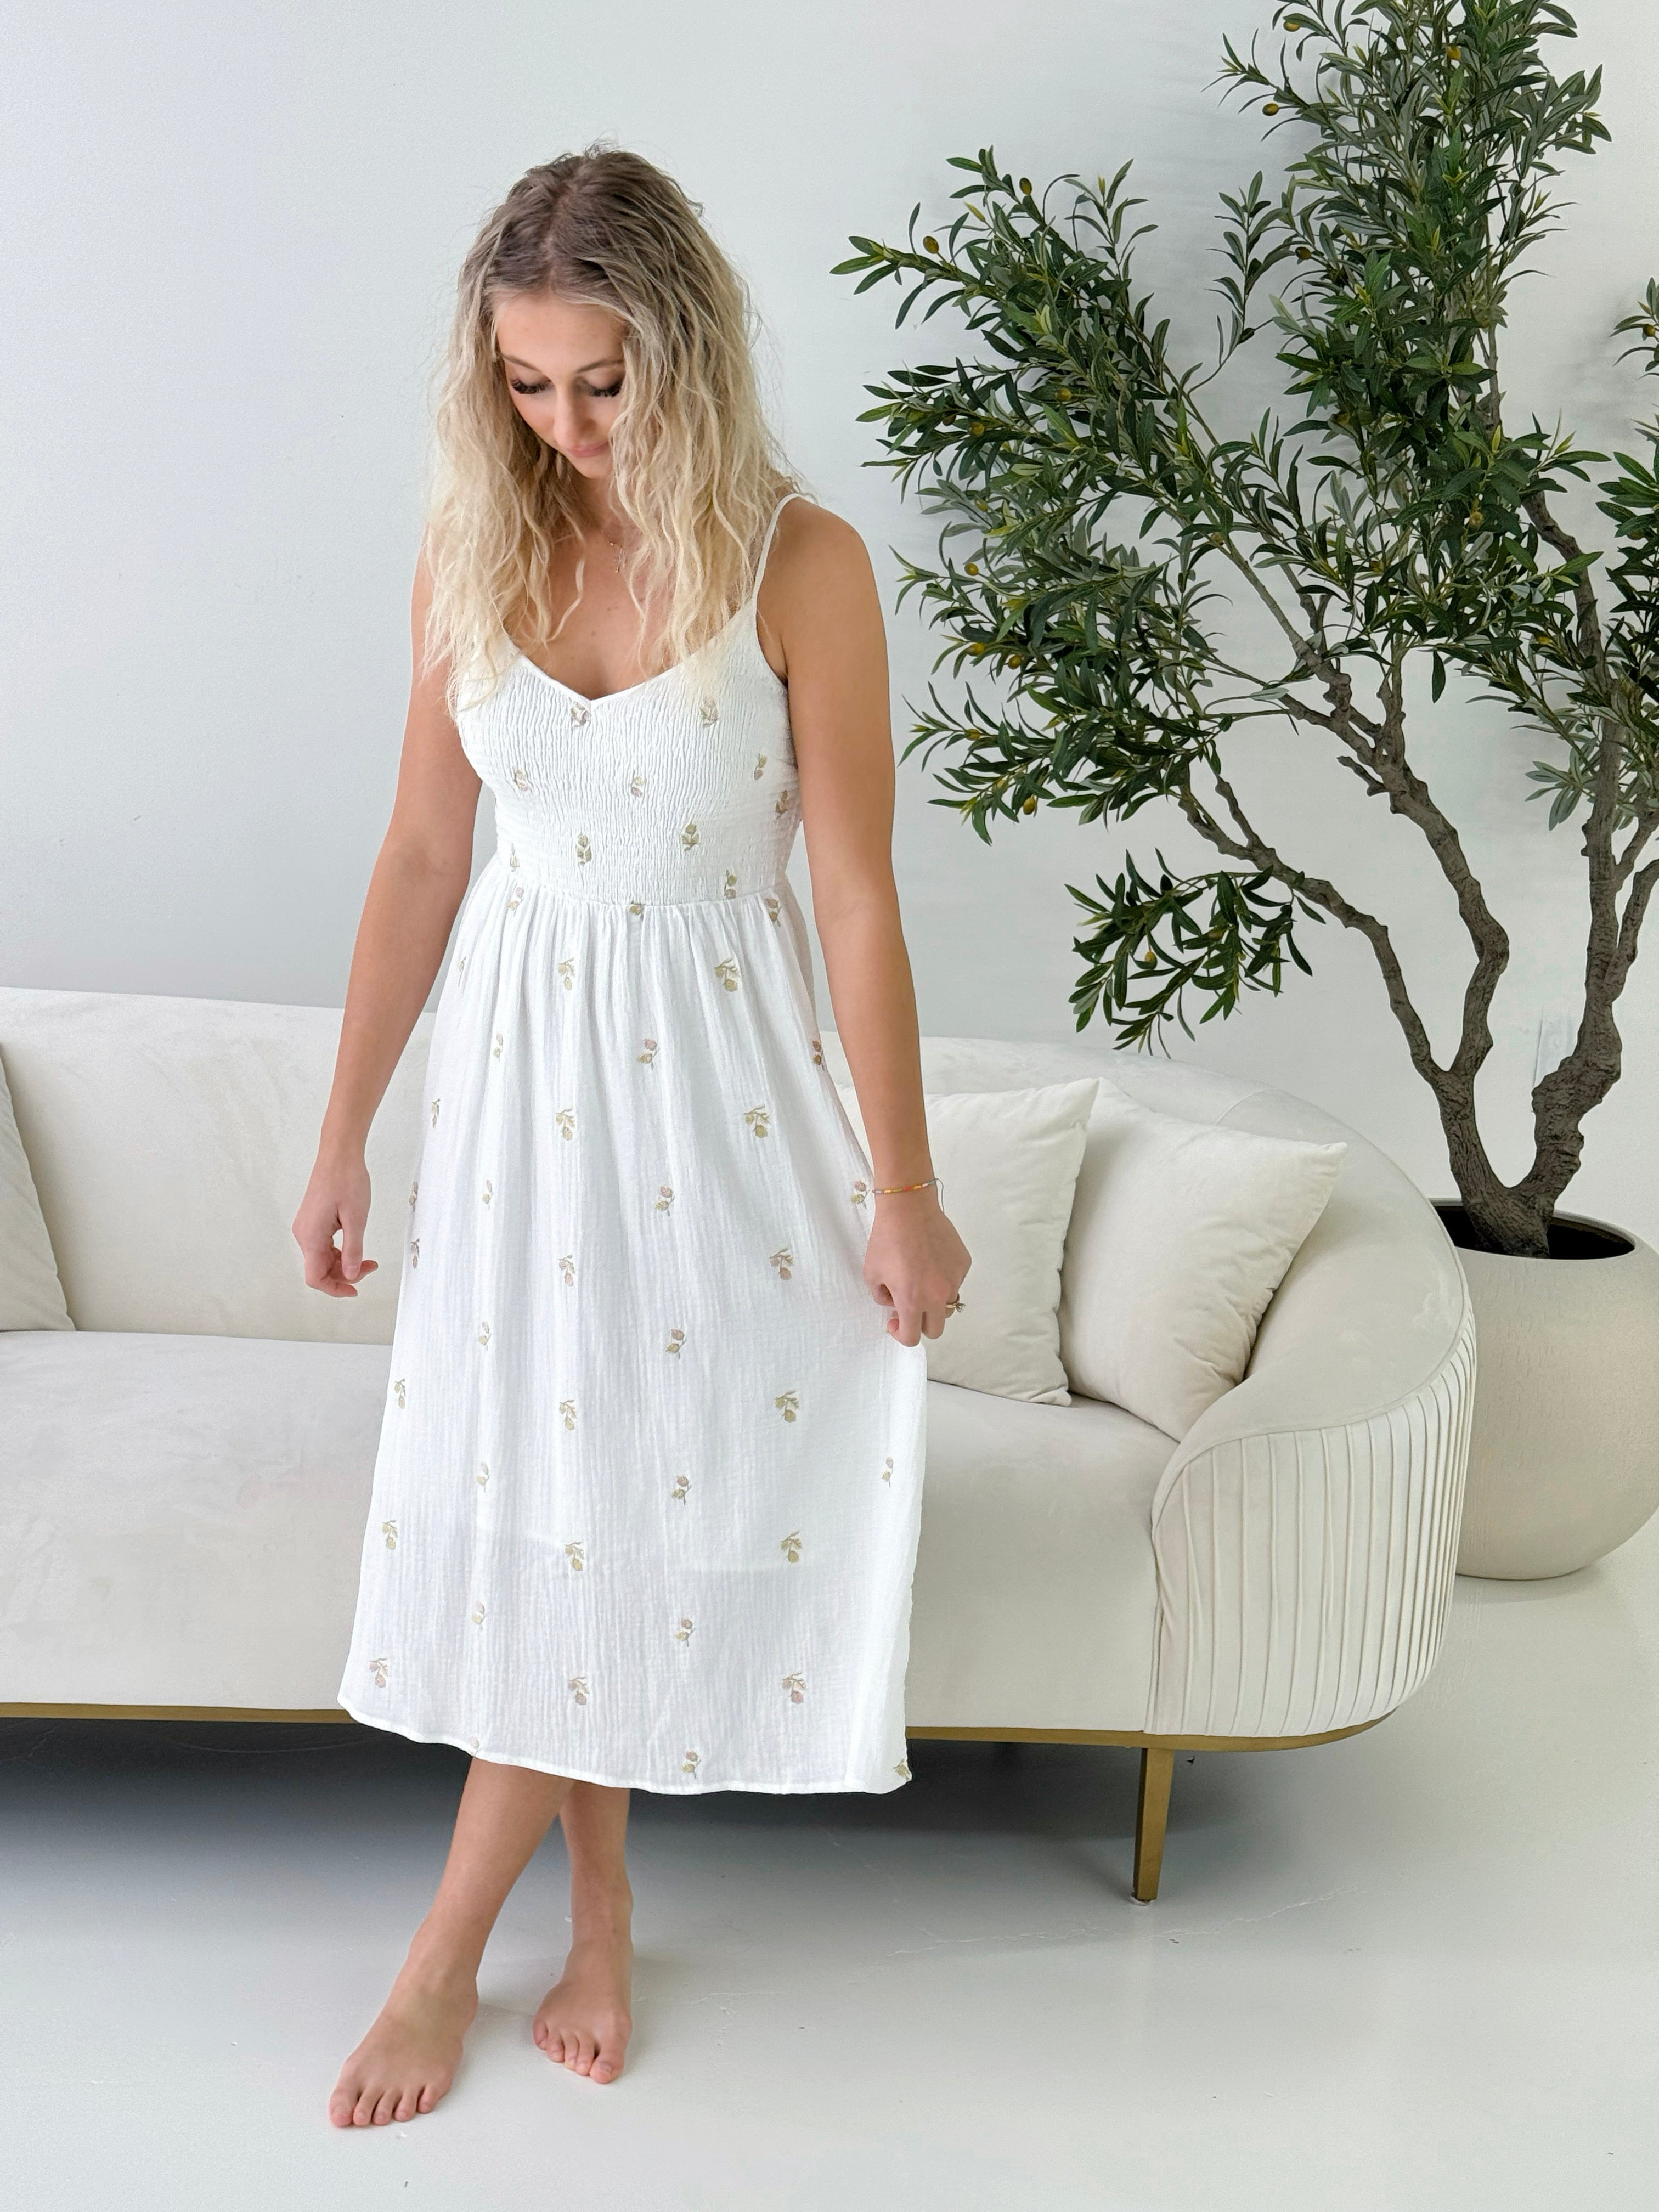 Mary Beth Embroidered Dress in Off White-152 Dresses - Long-Little Bird Boutique